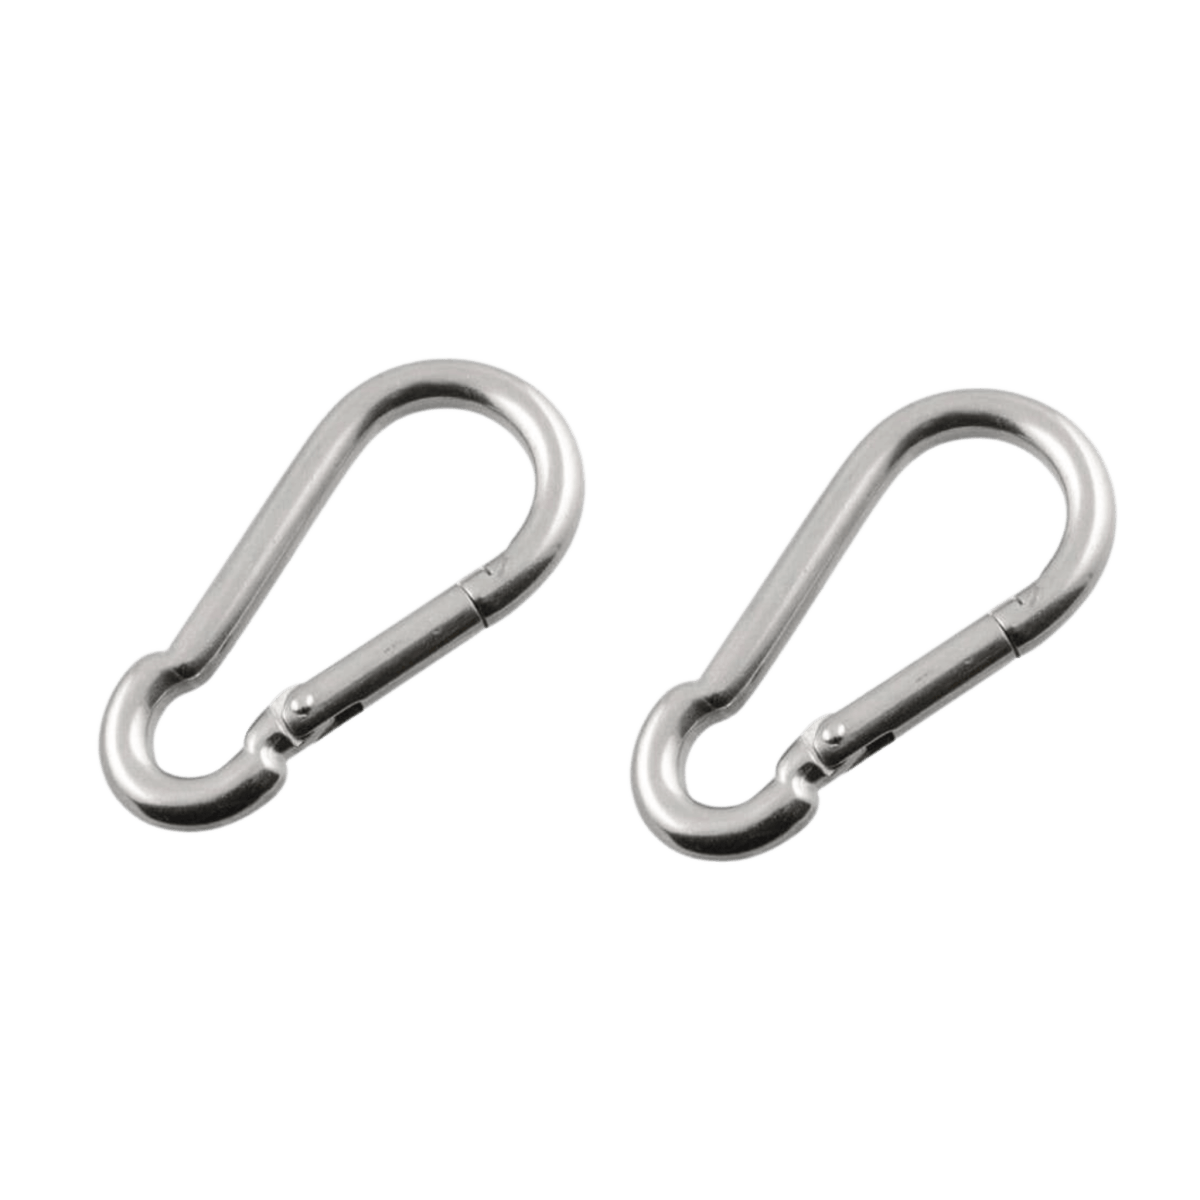 Extra Carabiners X2